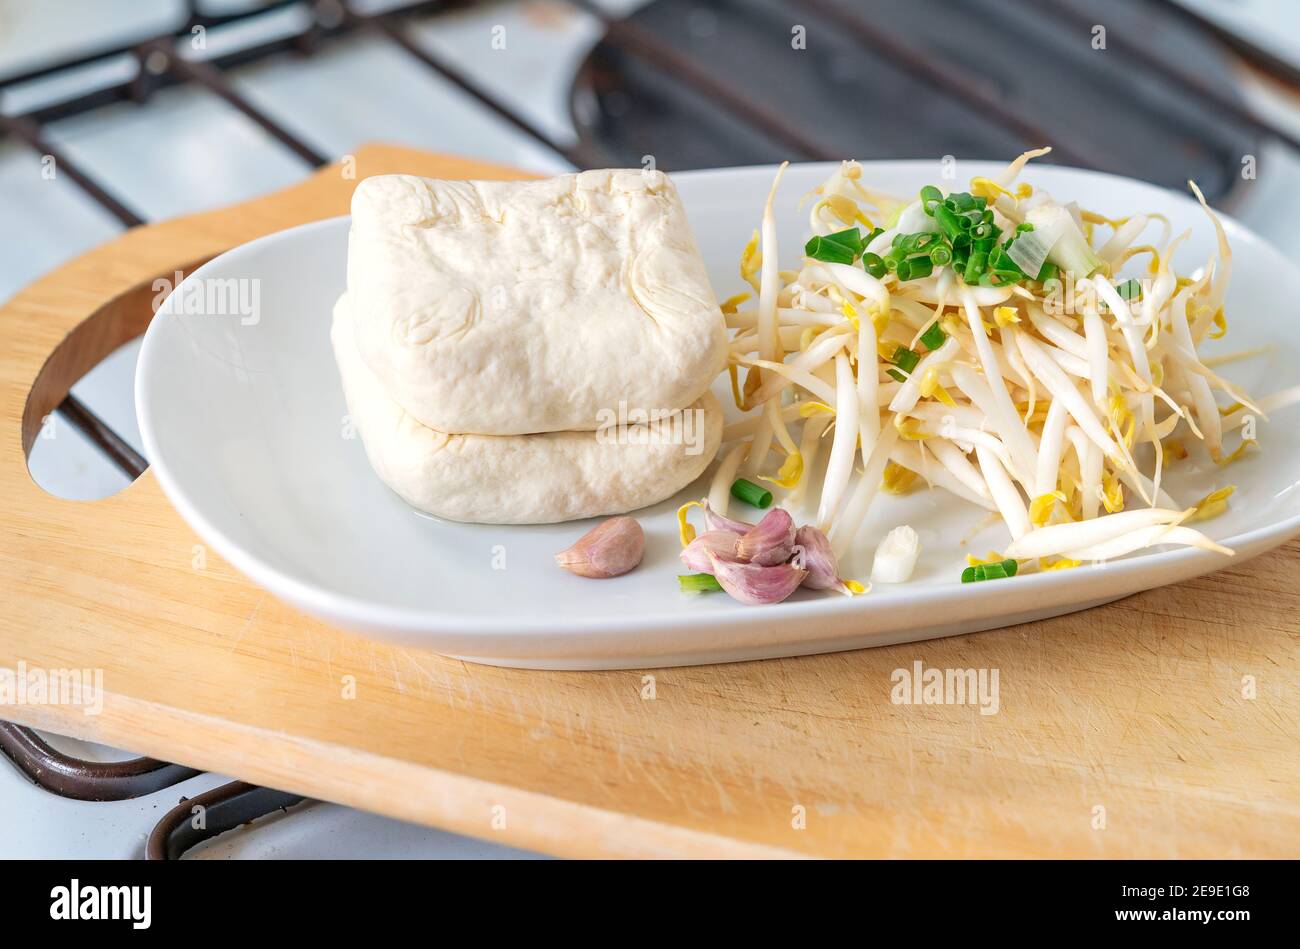 Organic bean sprouts, tofu, garlics and scallions in white plate which on wooden cutting board in kitchen, concept for cooking healthy vegetarian food Stock Photo